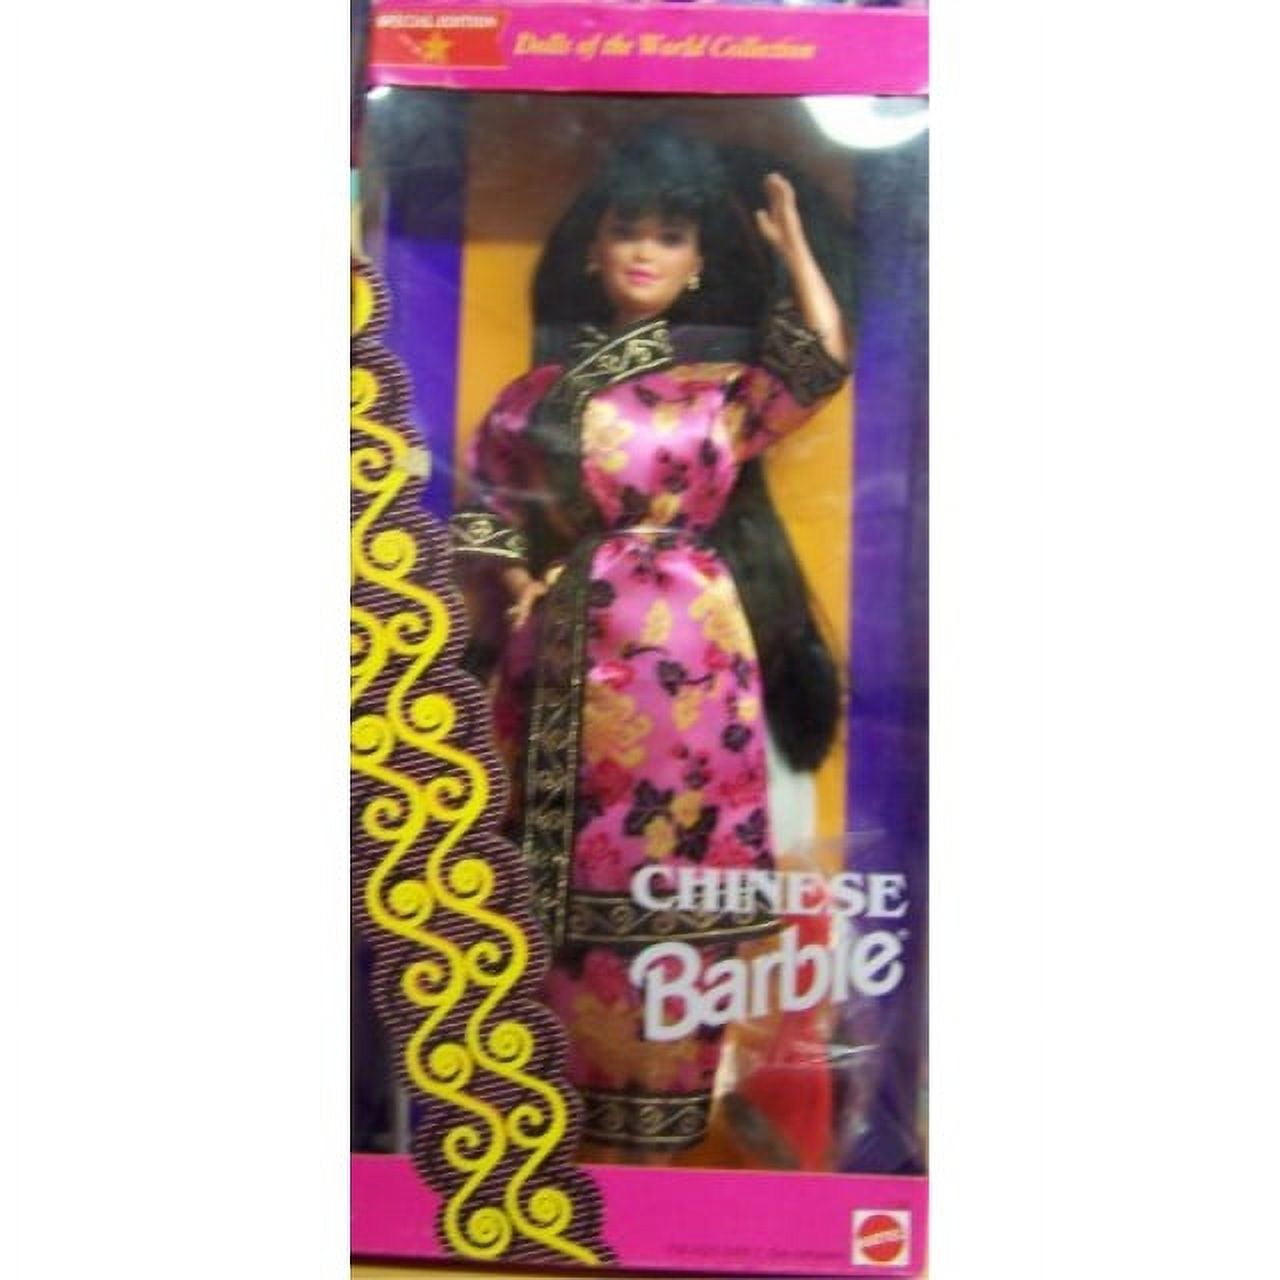 Chinese Dolls of the World Barbie Doll Special Edition 1993 Mattel 11180  NRFB